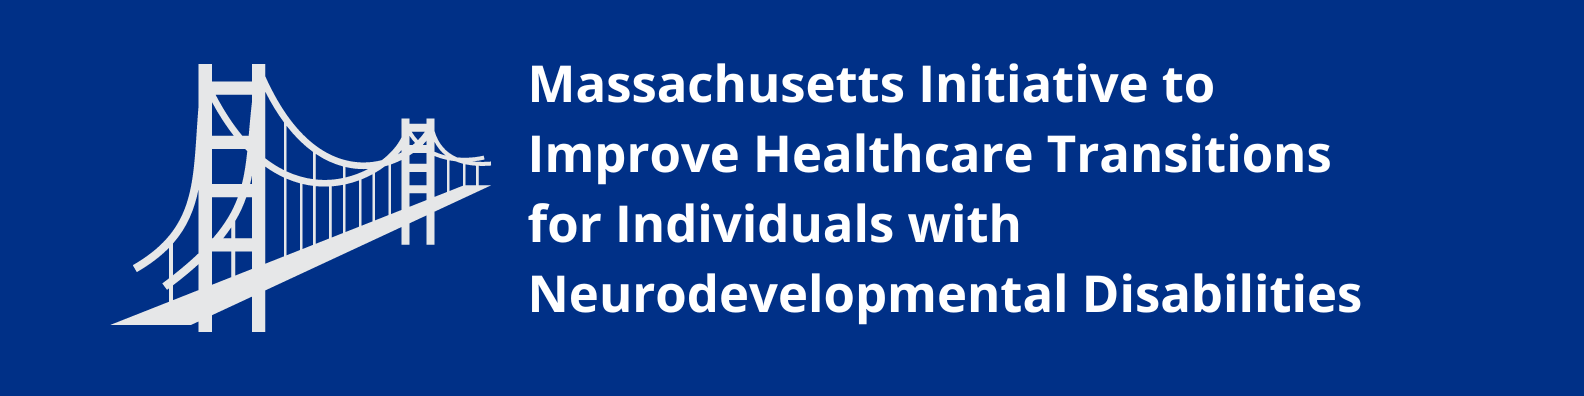 Massachusetts Initiative to Improve Healthcare Transitions for Individuals with Neurodevelopmental Disabilities 2023 Banner